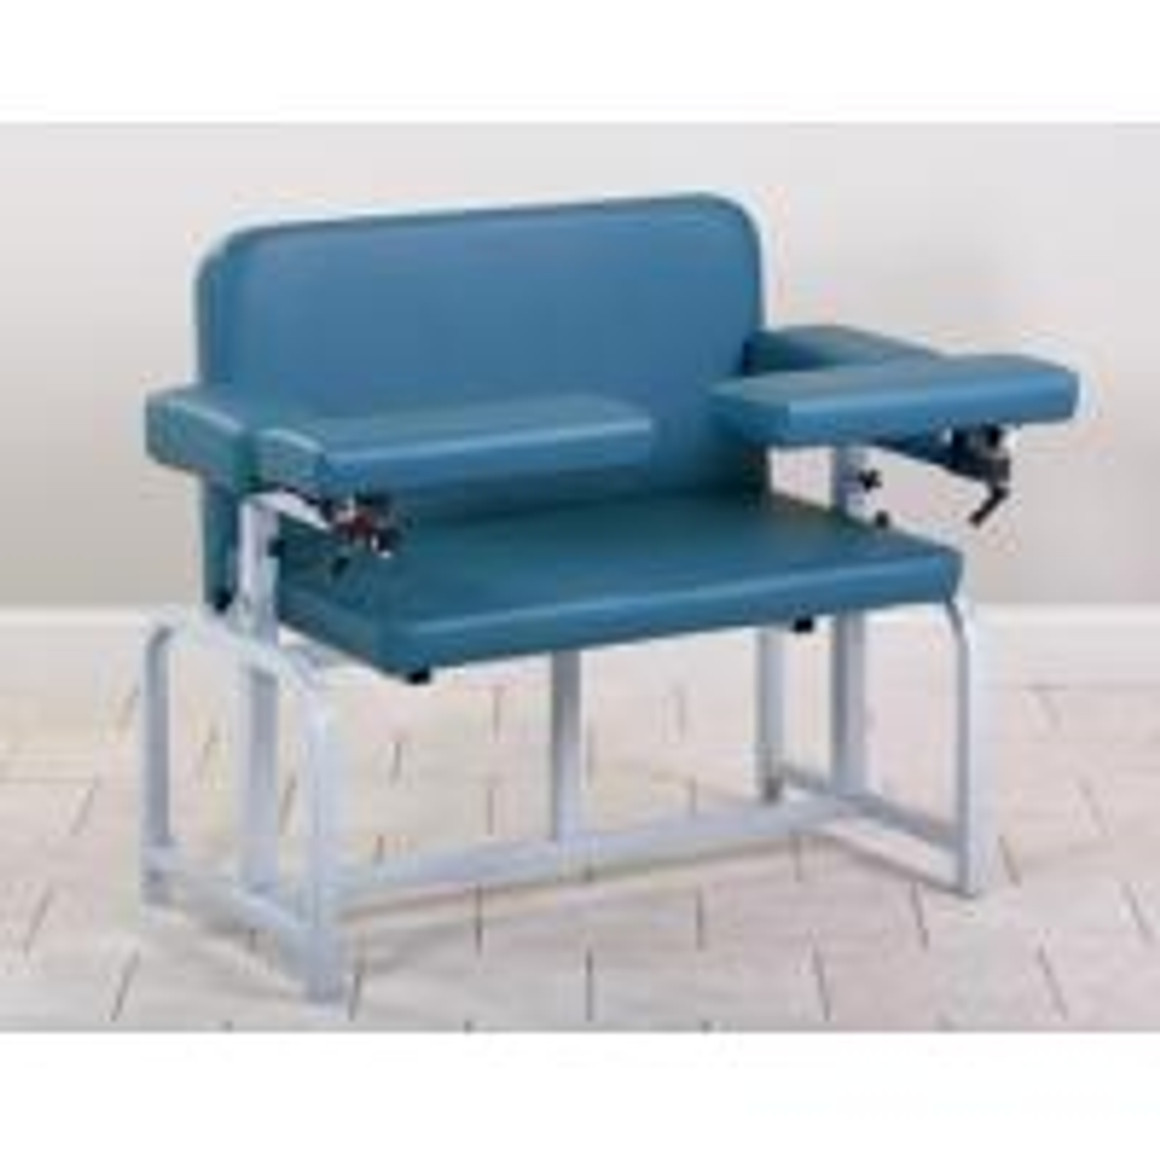 Clinton Bariatric Blood Drawing Chair with Flip-Arms, Viscaya Palm